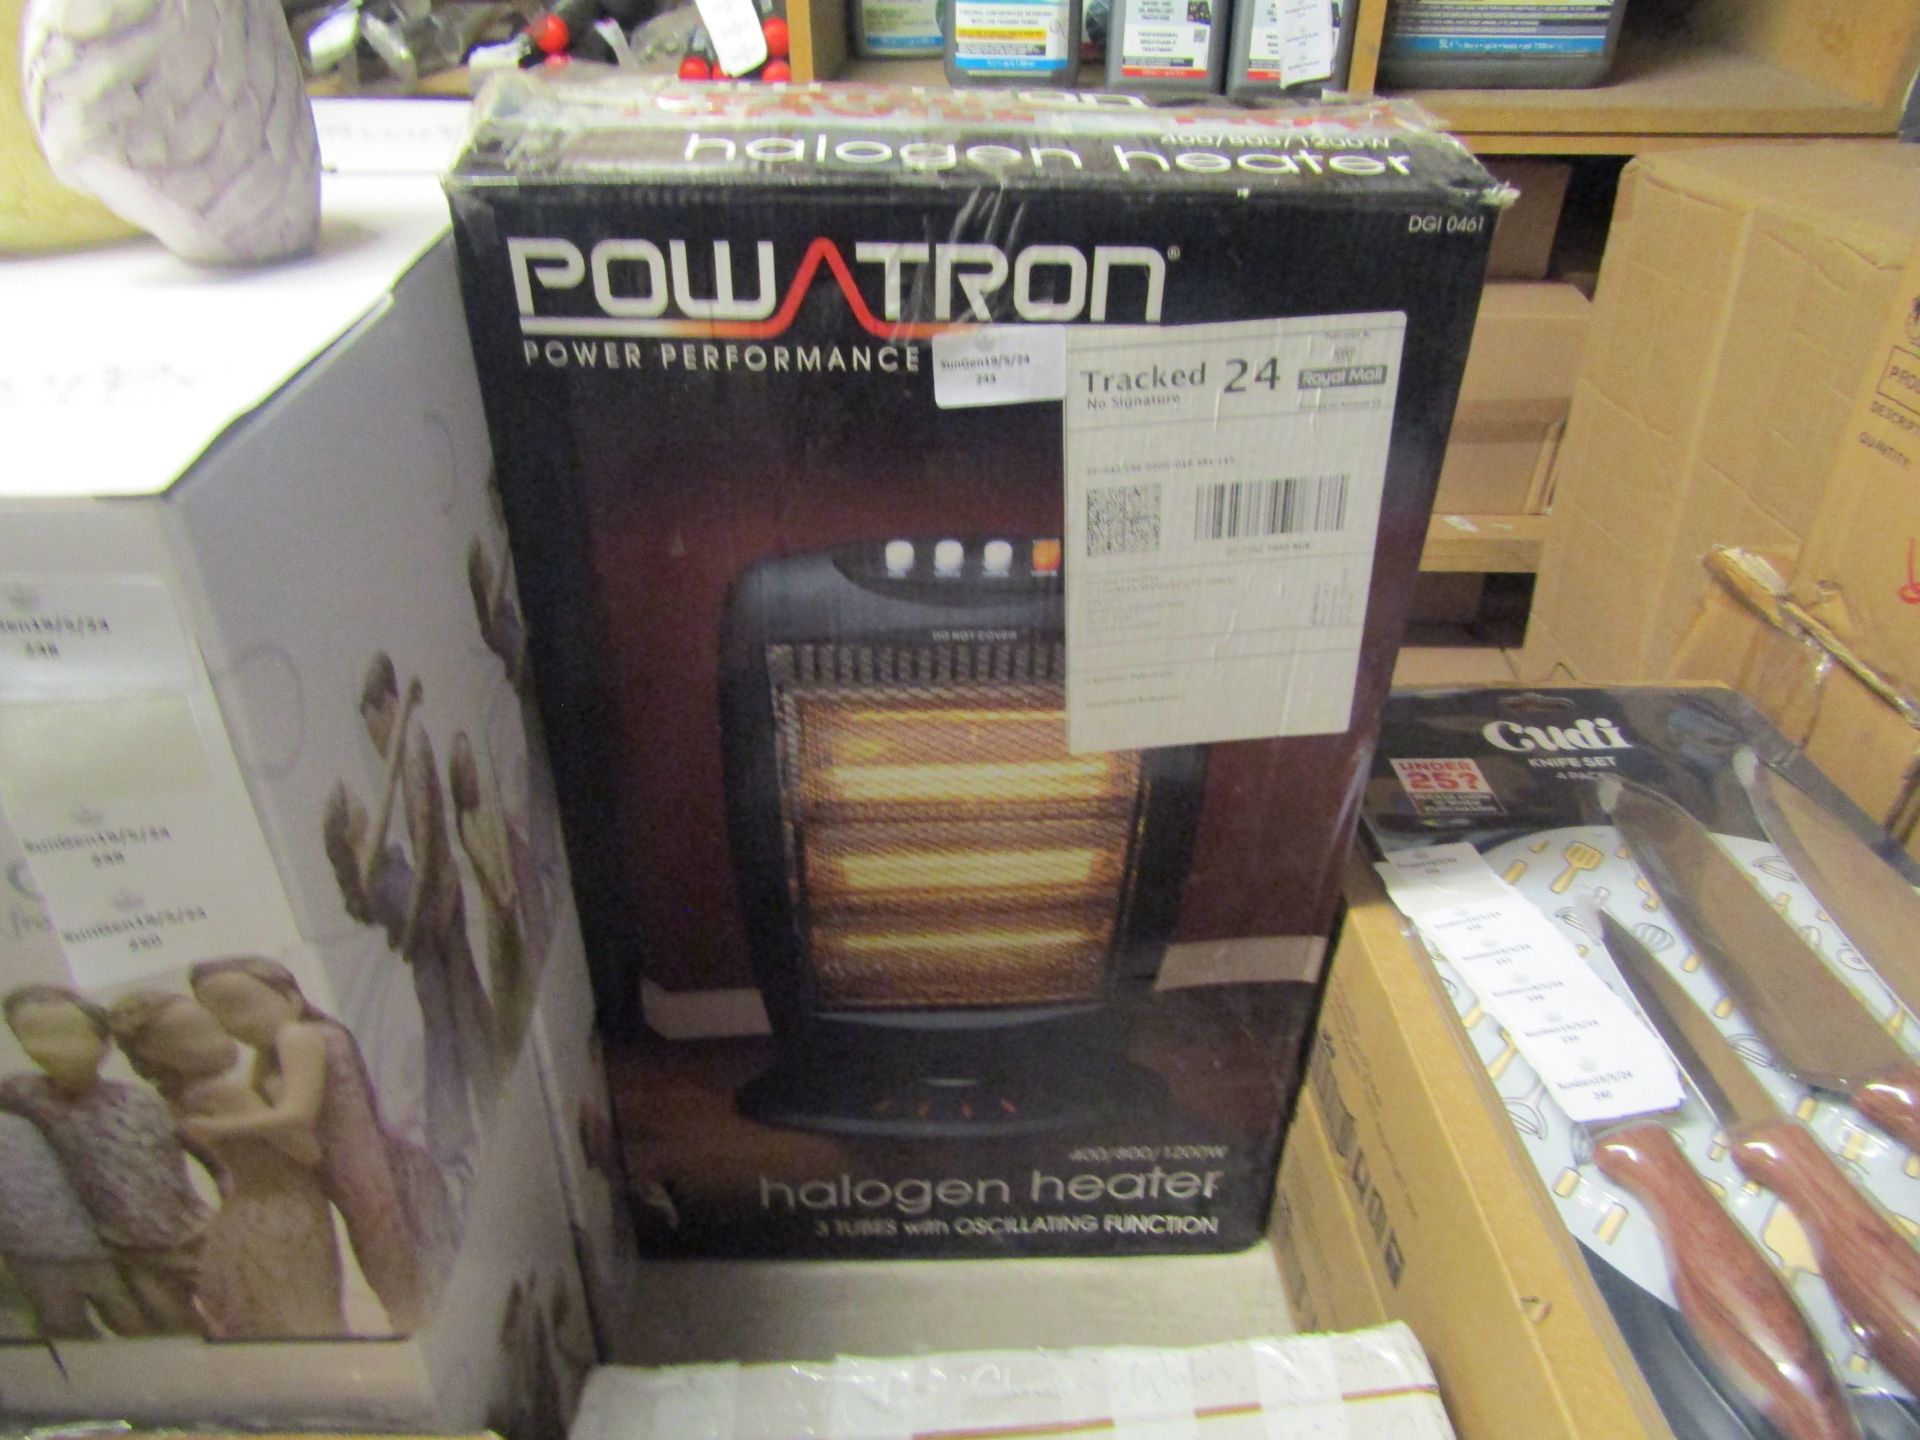 Powatron Halogen Heater 3 Tubes Oscillating Function, 400/800/1200w - Unchecked & Boxed.